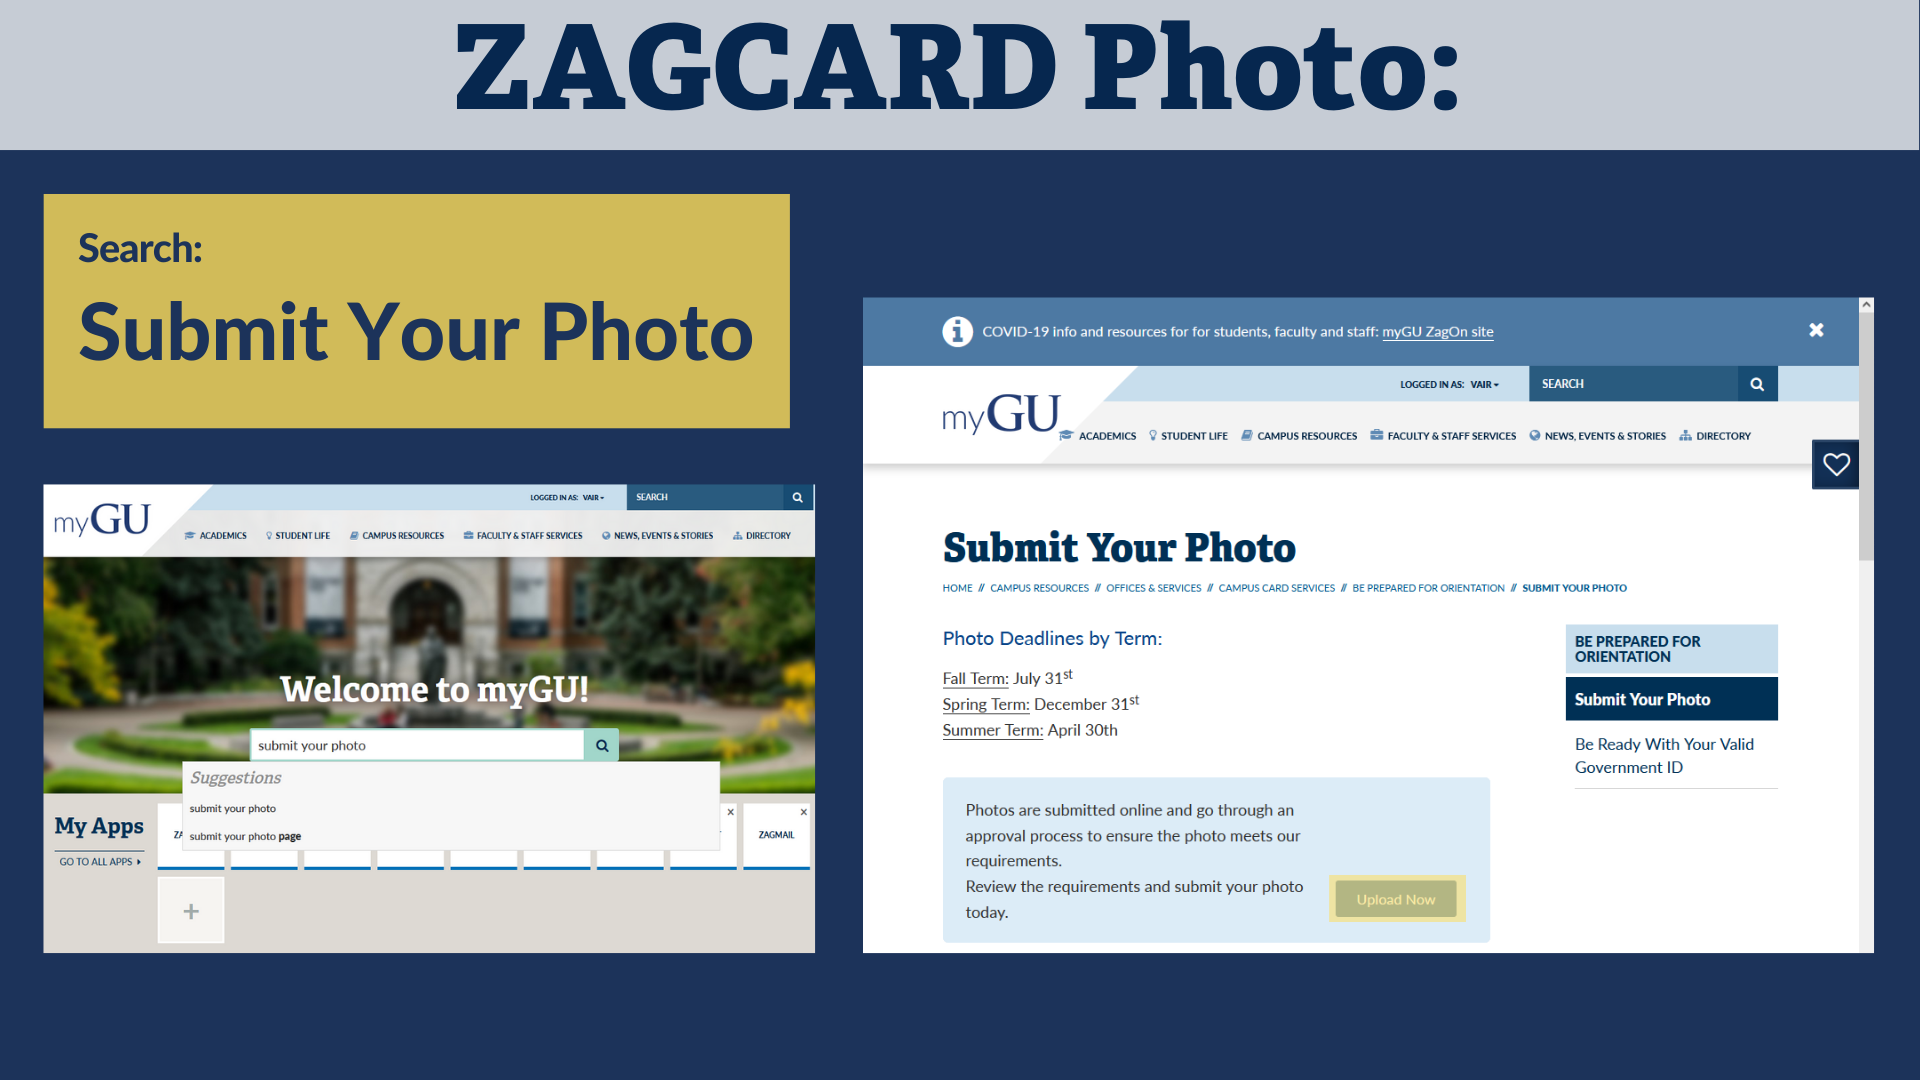 GON ZAGCARD Photo Submission